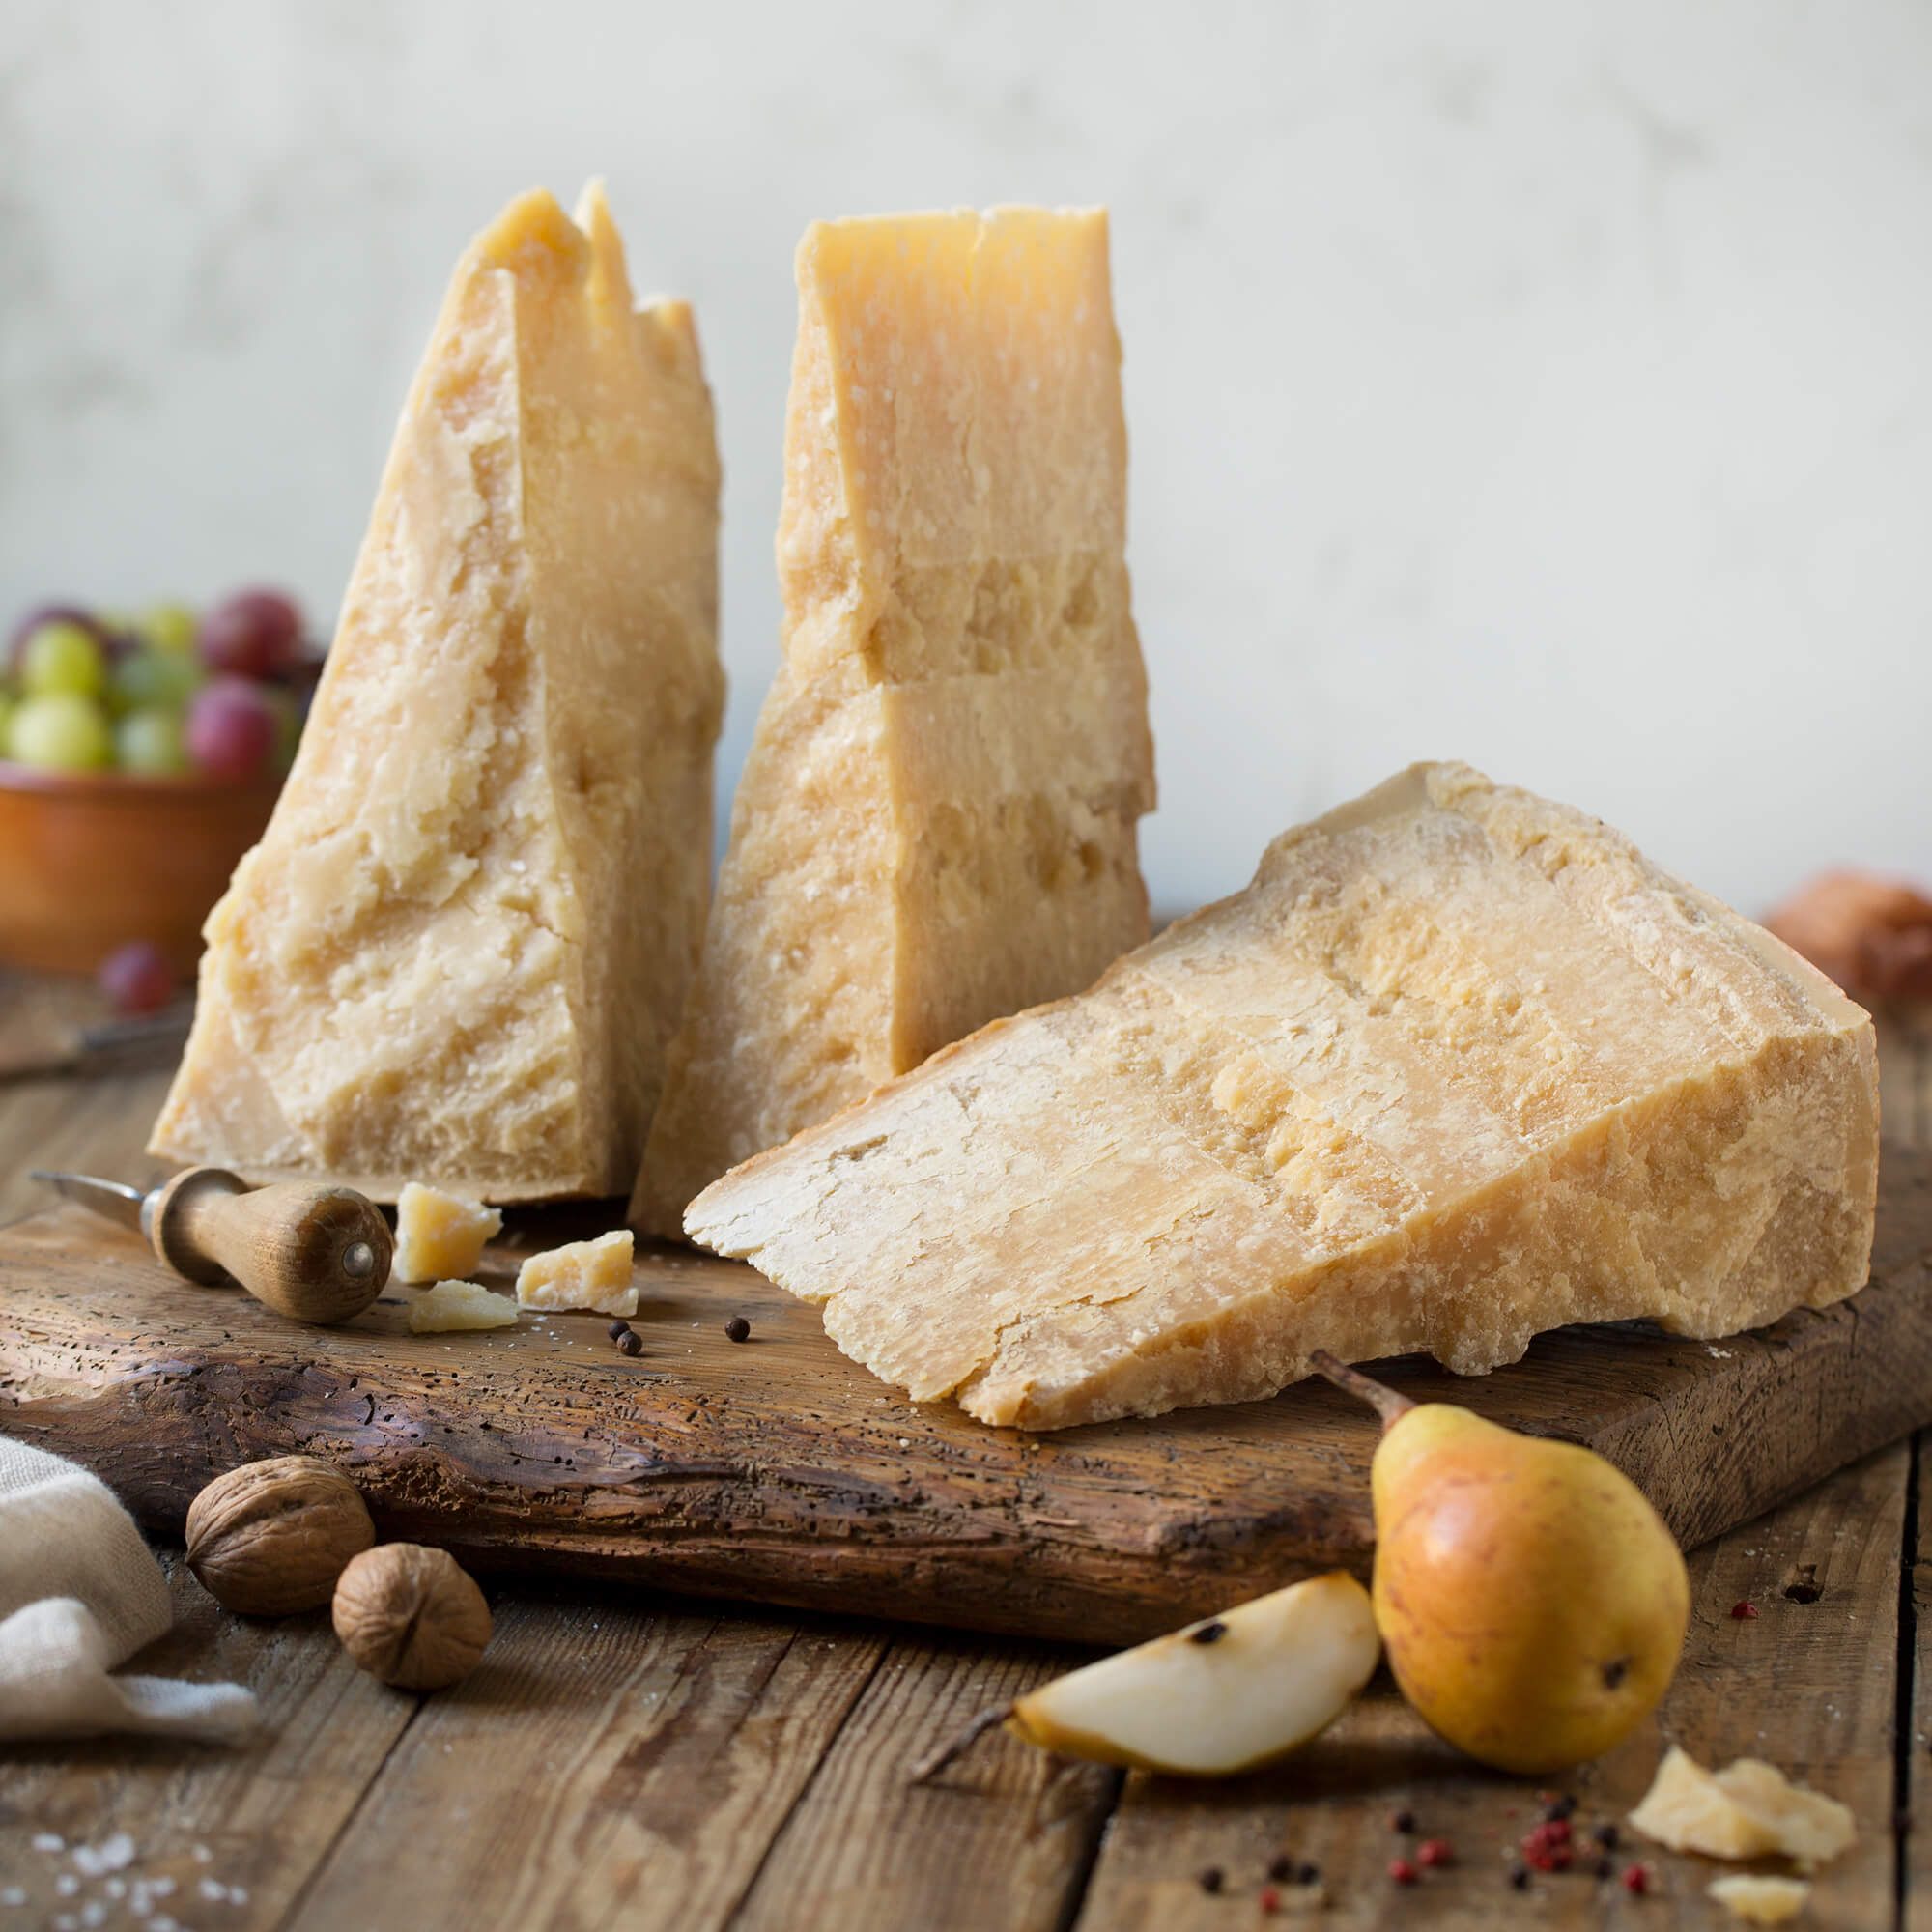 Tris Parmigiano Reggiano PDO 48, 60, 72 months  Emilia Food Love - EMILIA  FOOD LOVE Selected with love in Italy